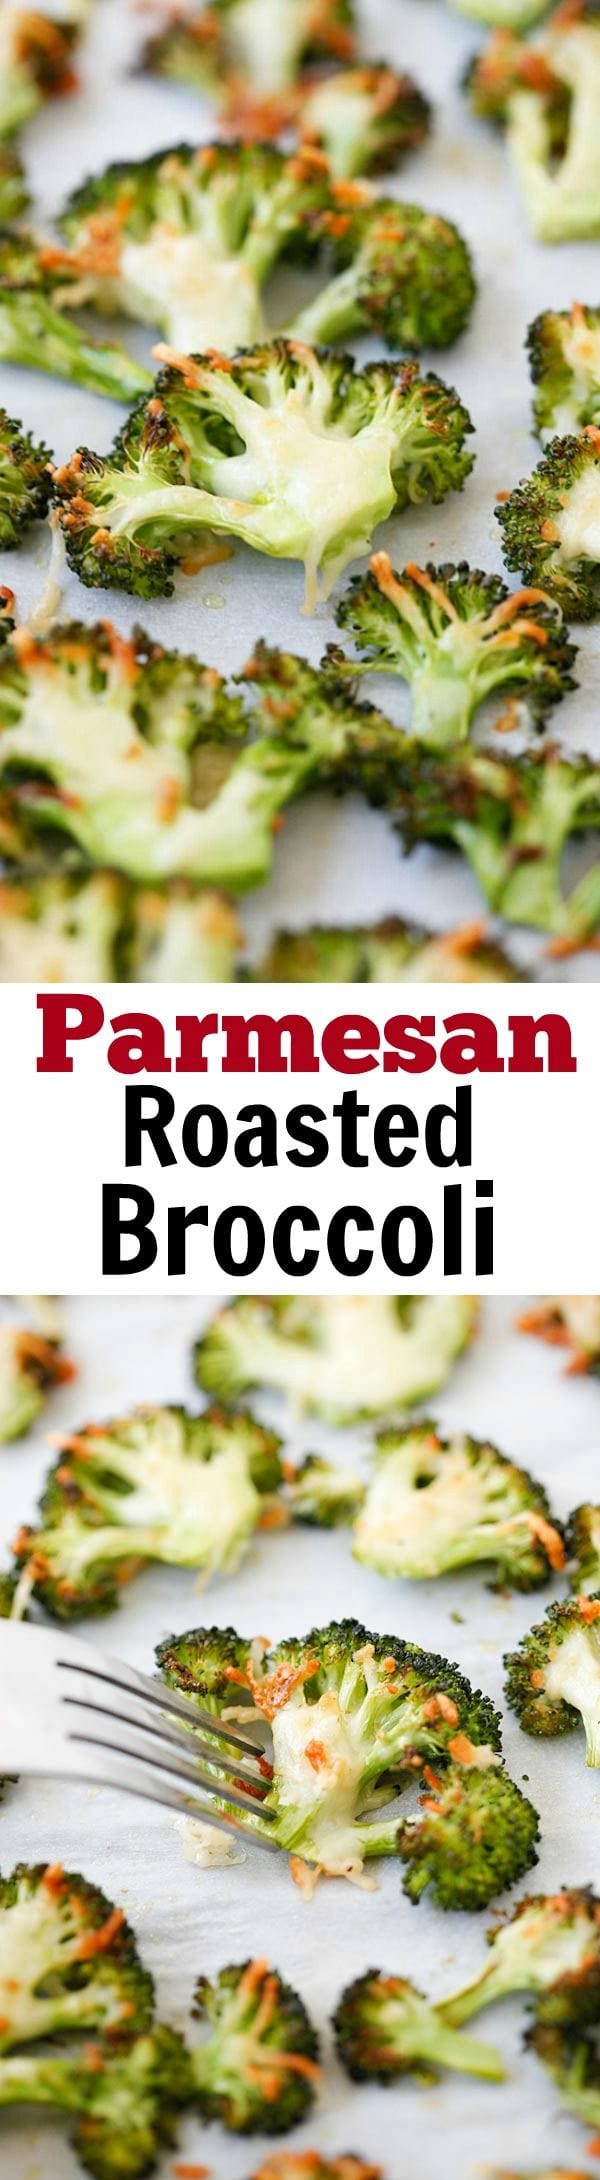 Parmesan Roasted Broccoli – easy delicious roasted broccoli recipe, with Parmesan cheese. 5 mins prep and 20 mins to dinner table | rasamalaysia.com